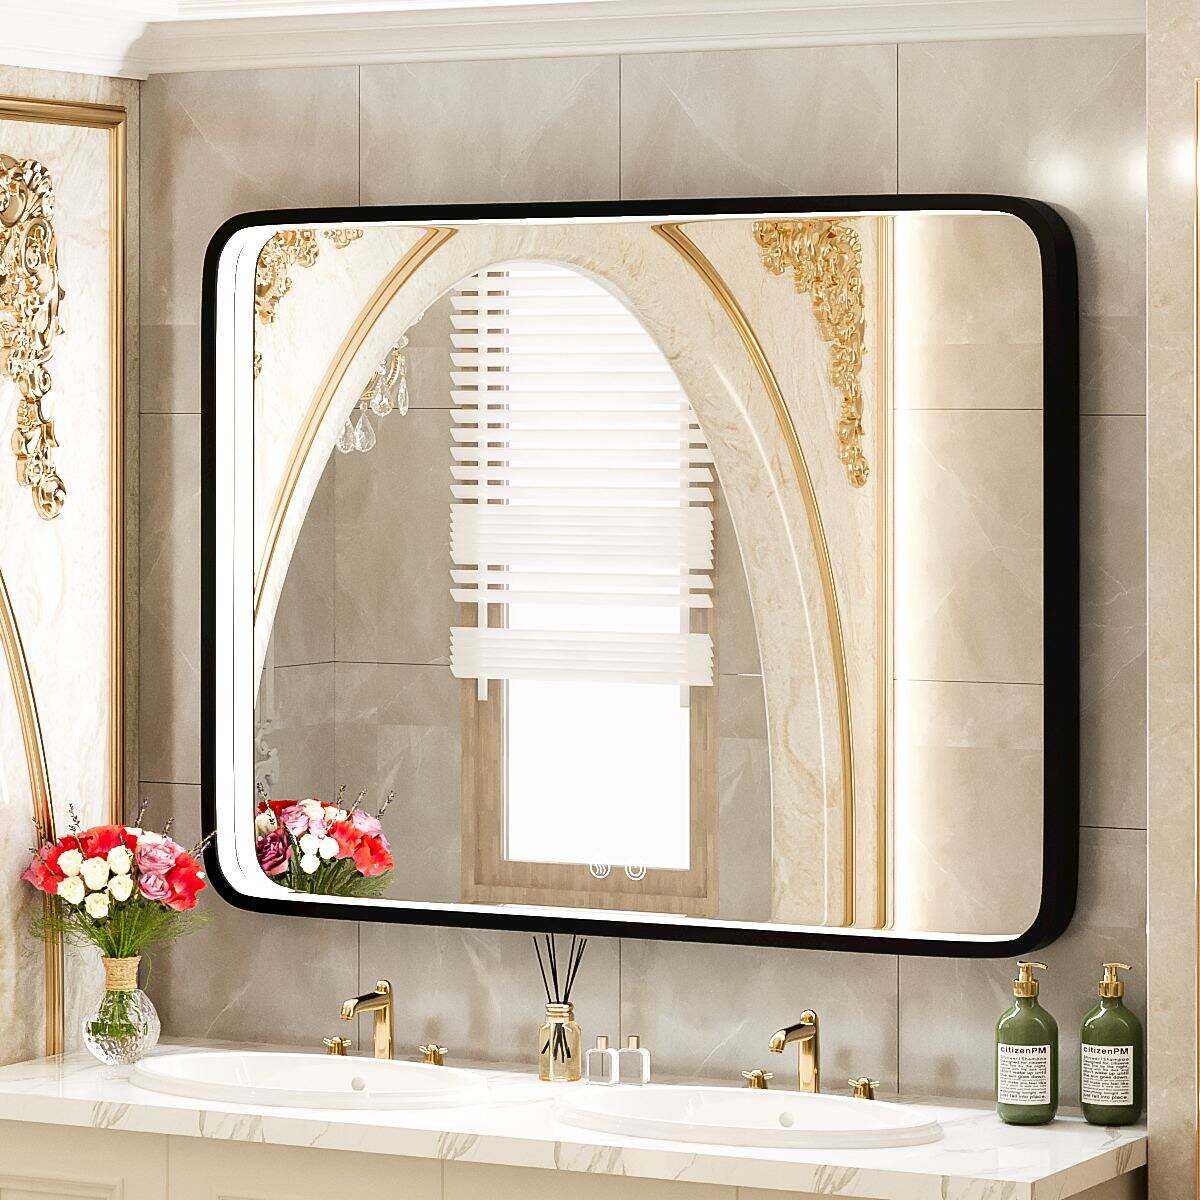 JJGullit bathroom mirror supplier  40x30 Inch LED Bathroom Mirror with Lights, Black Metal Framed LED Vanity Mirror, French Cleats Wall Mounted Anti Fog Dimmable Lighted Bathroom Mirror for Makeup(Horizont